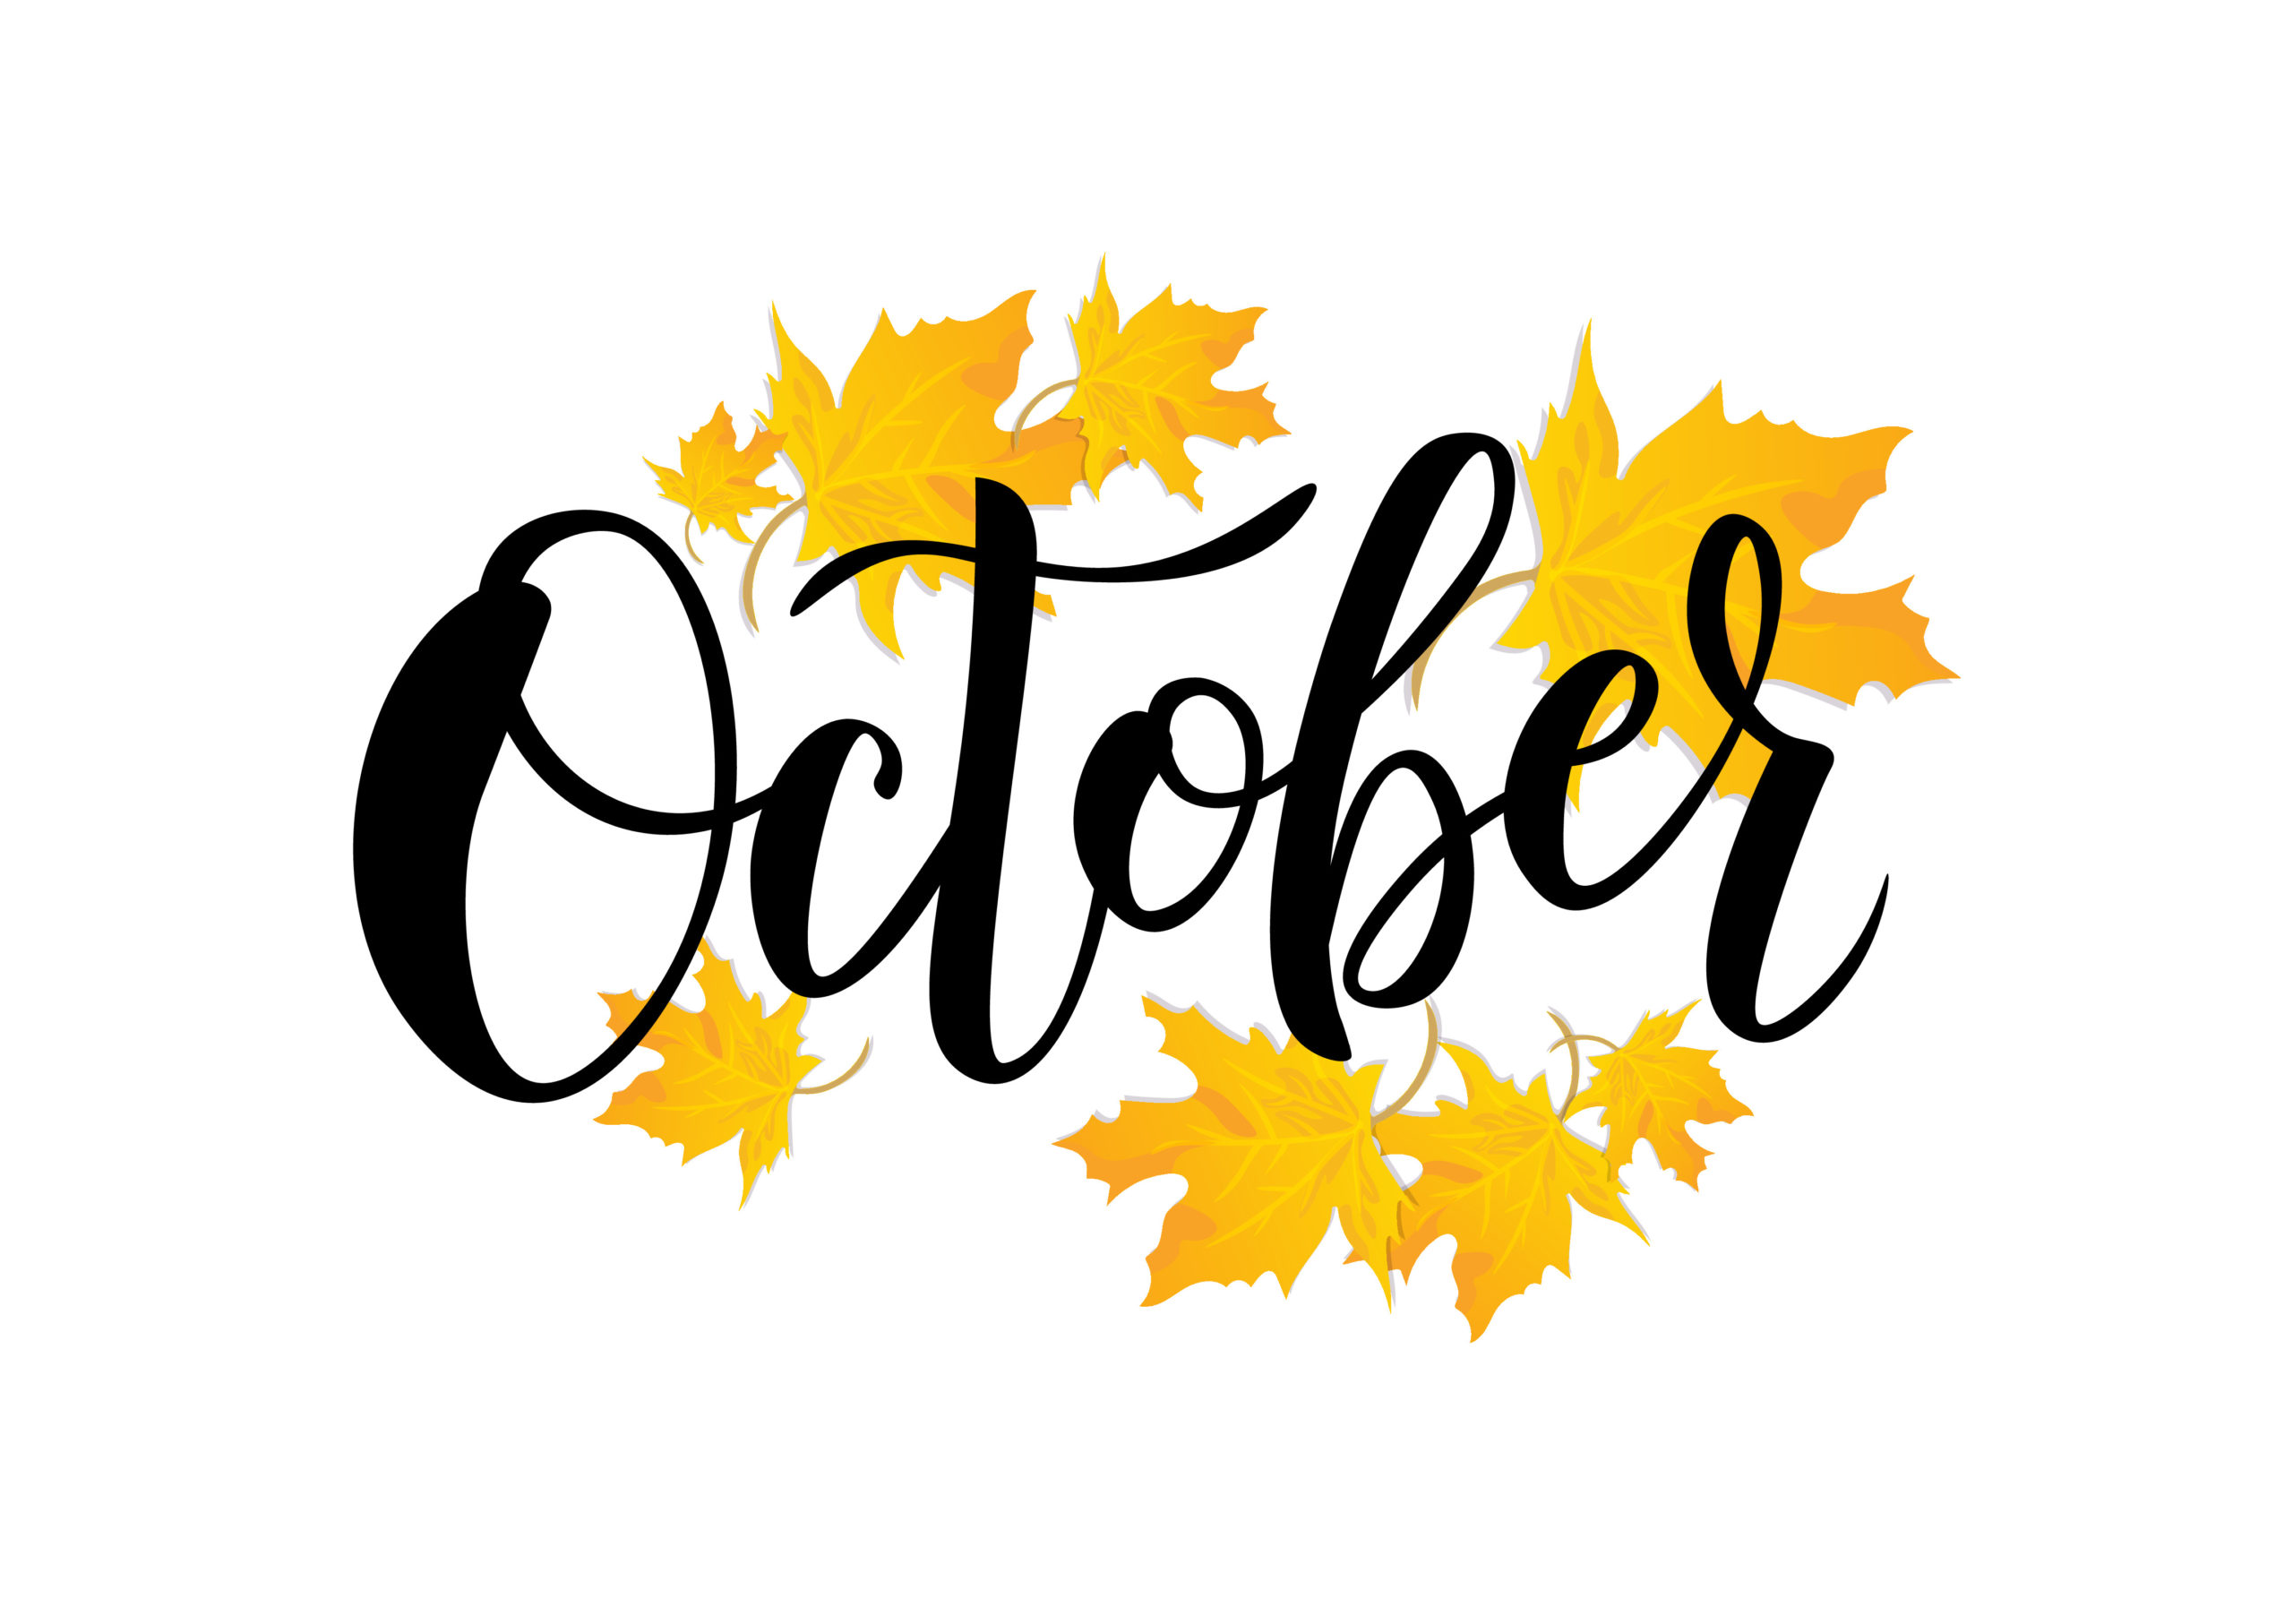 October in Review